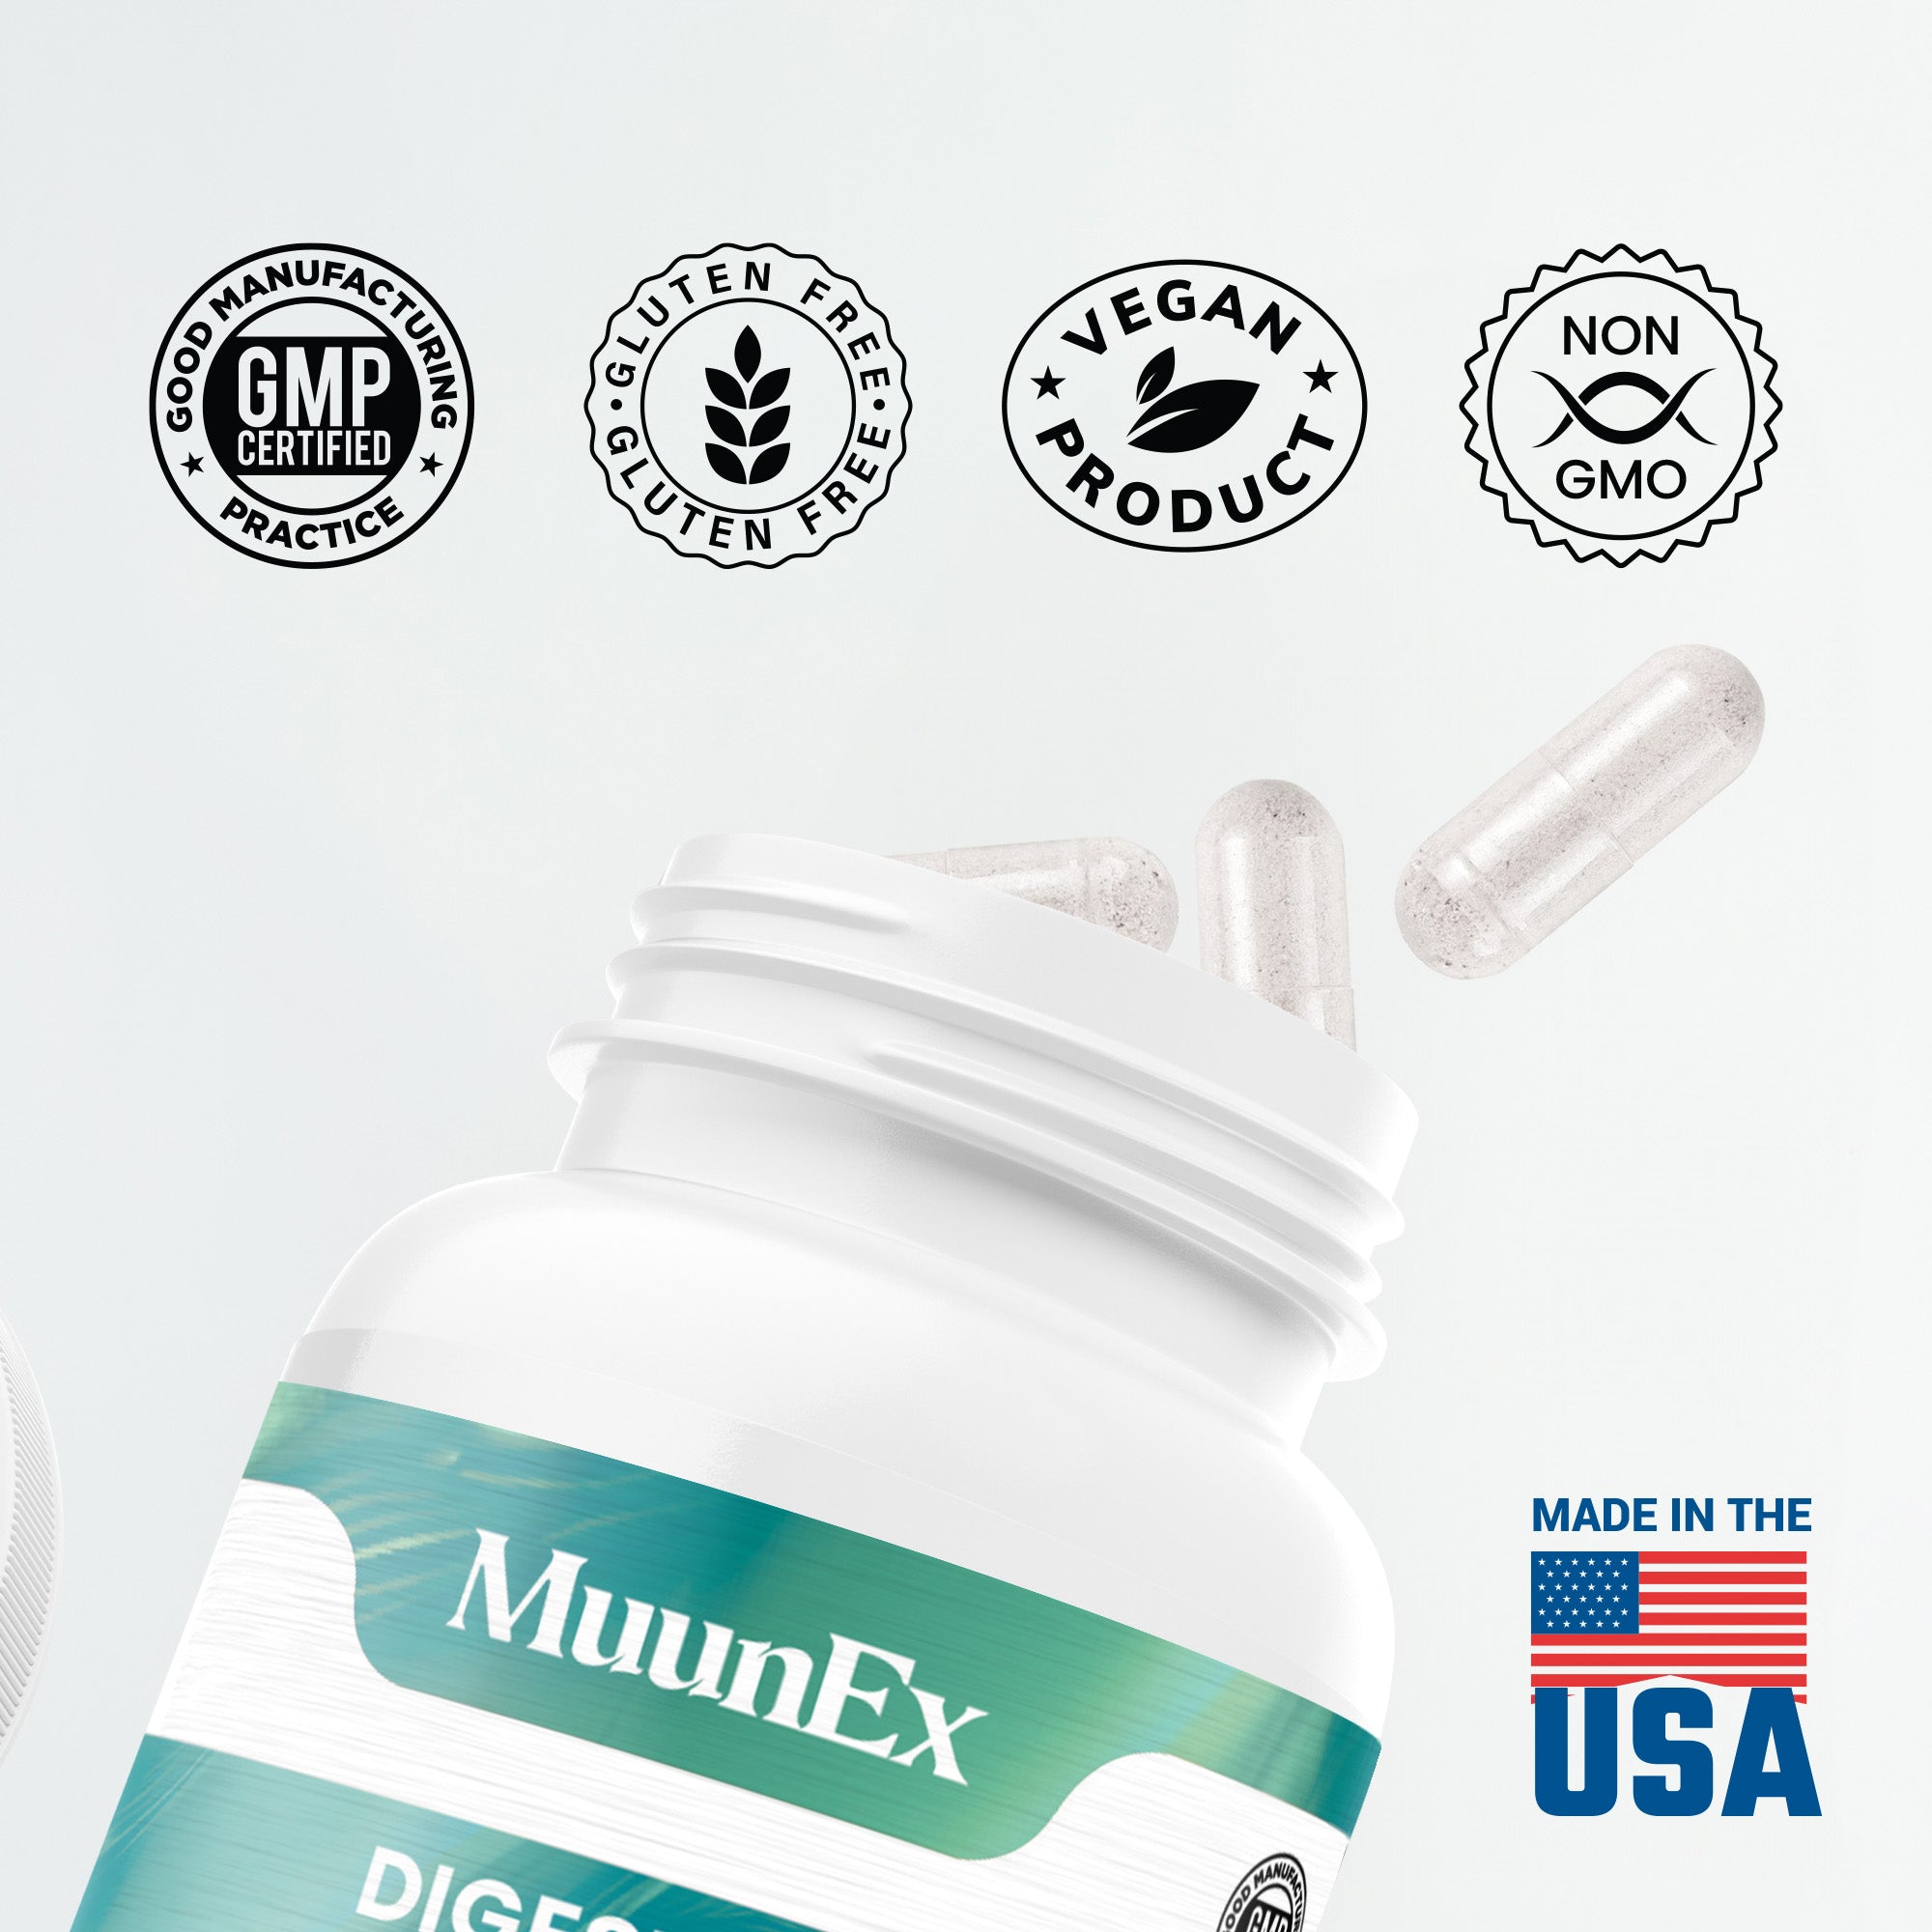 Muunex Digestive Enzymes with Probiotics and Bromelain - 60 Capsules